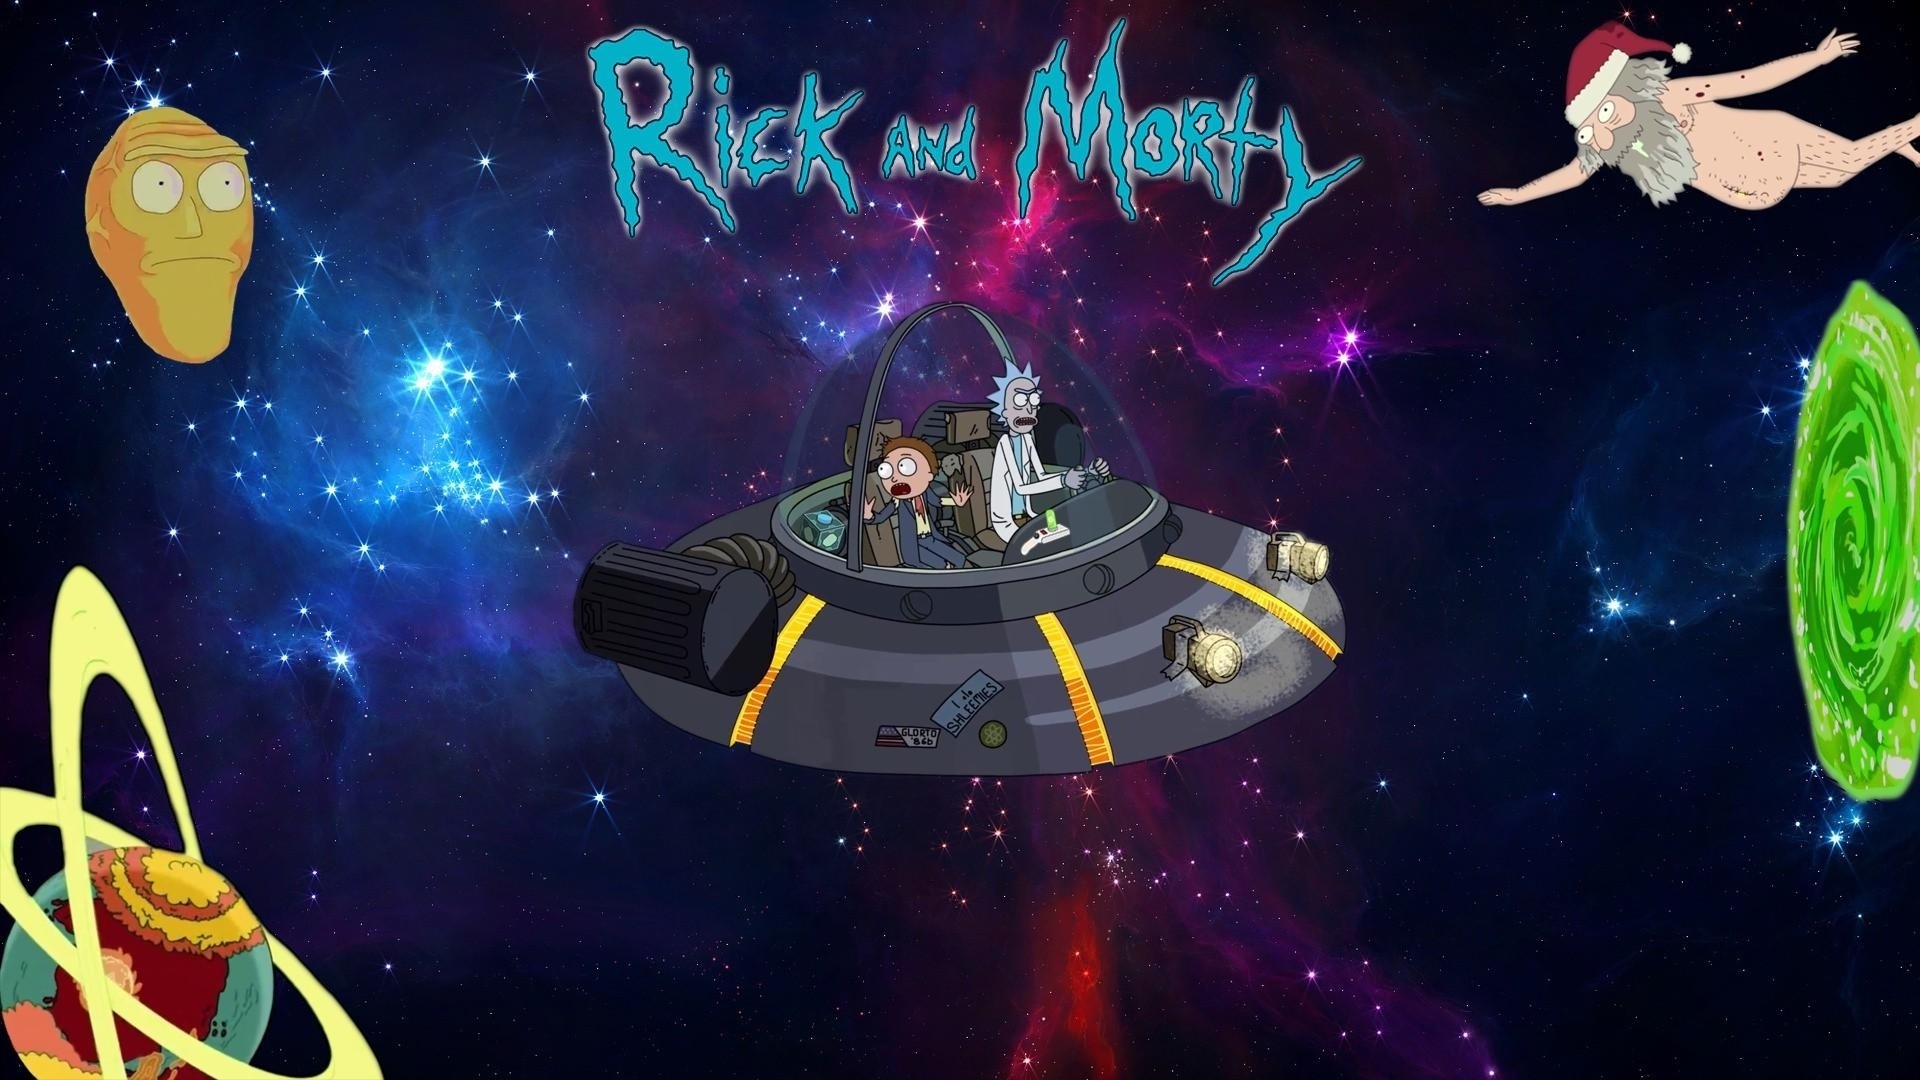 10 Latest Rick And Morty Desktop Backgrounds FULL HD 1080p For PC Background 2020